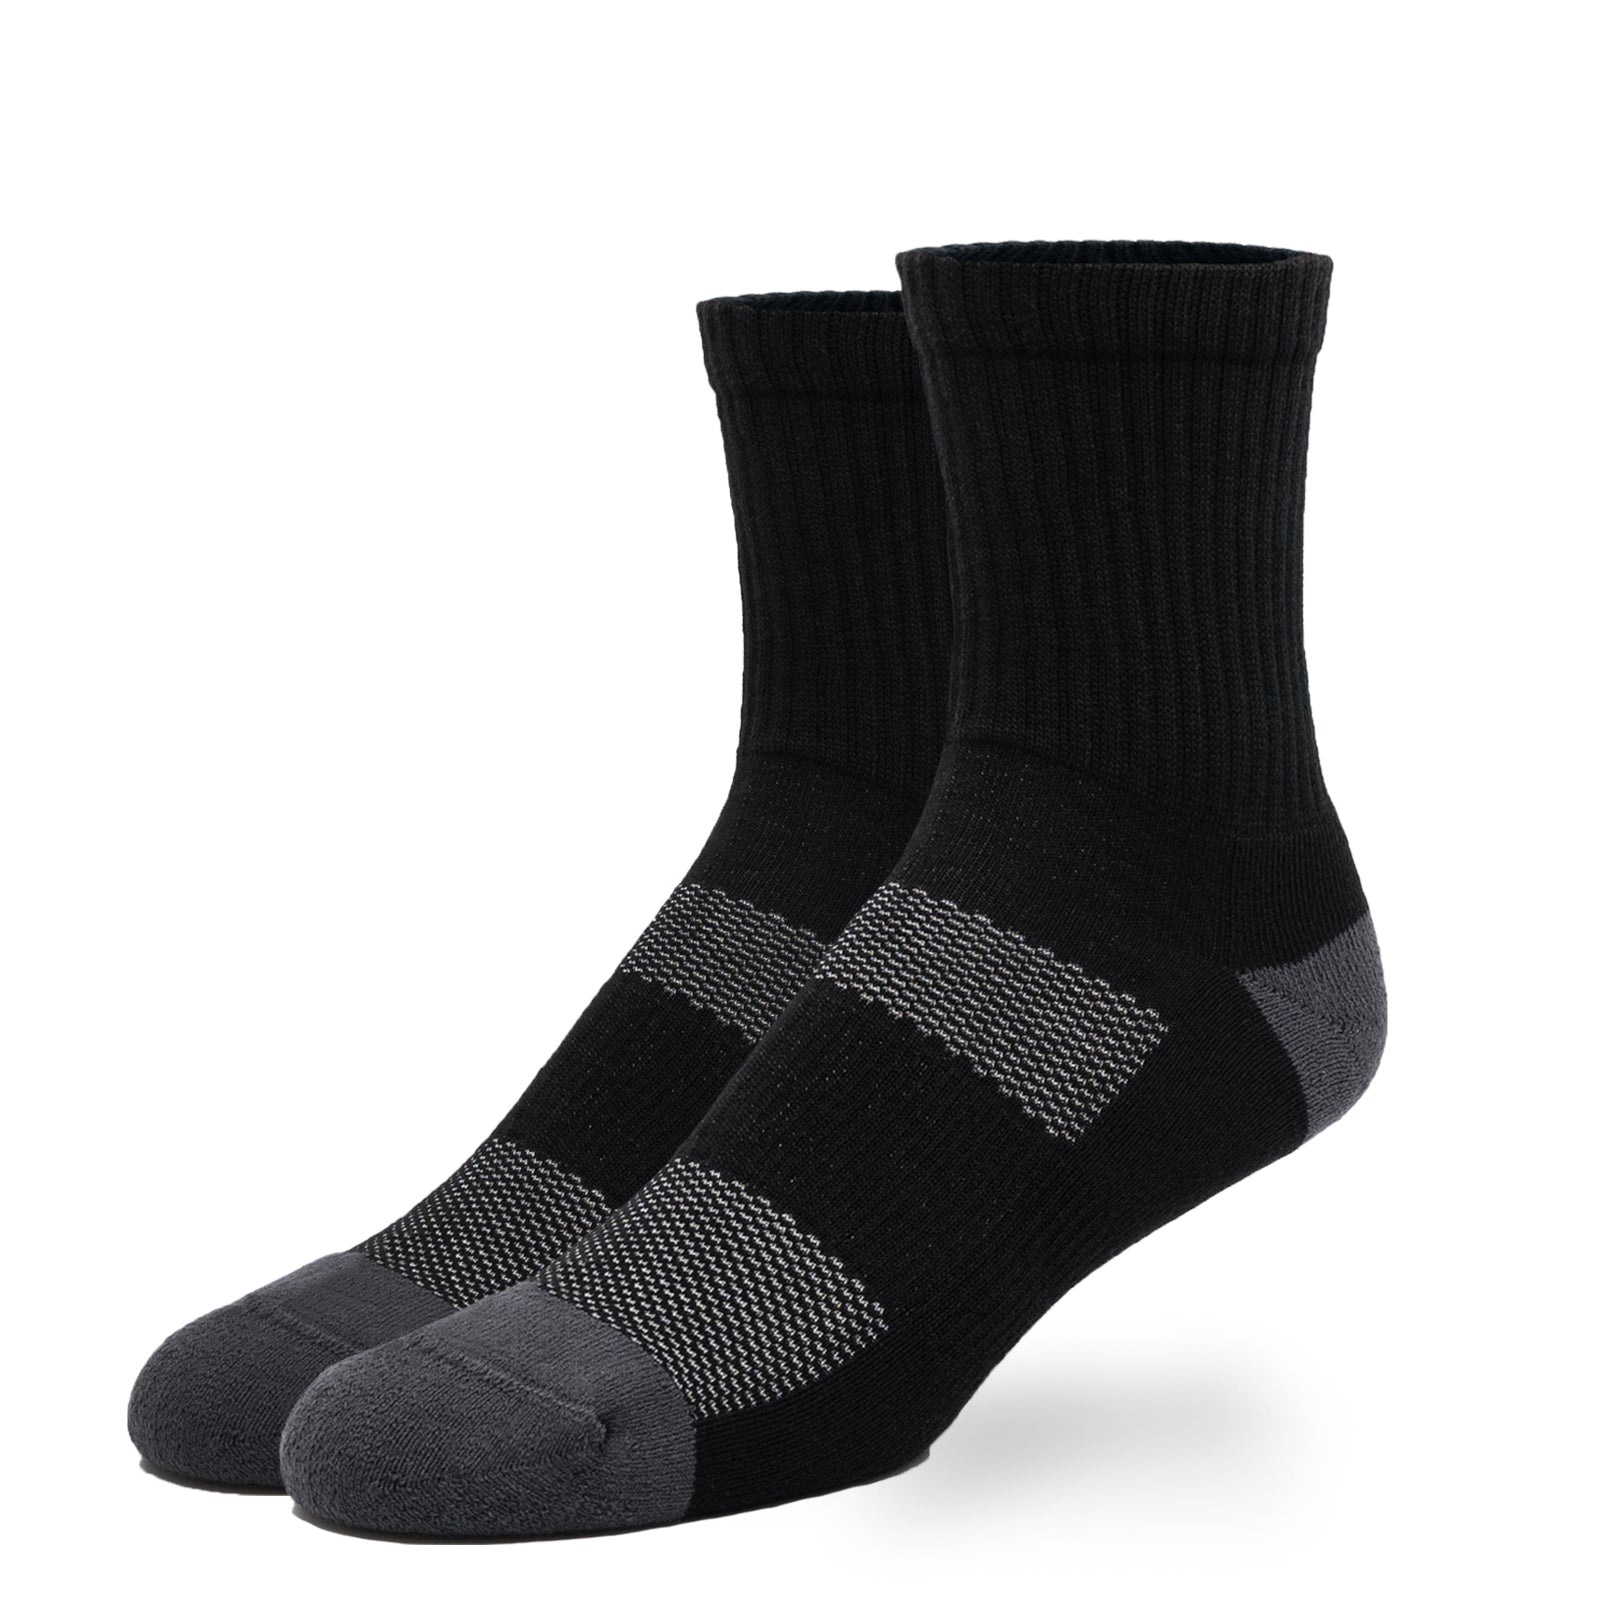 OX TROT: ODORLESS ANKLE SOCKS - 3 PACK – OX SOX